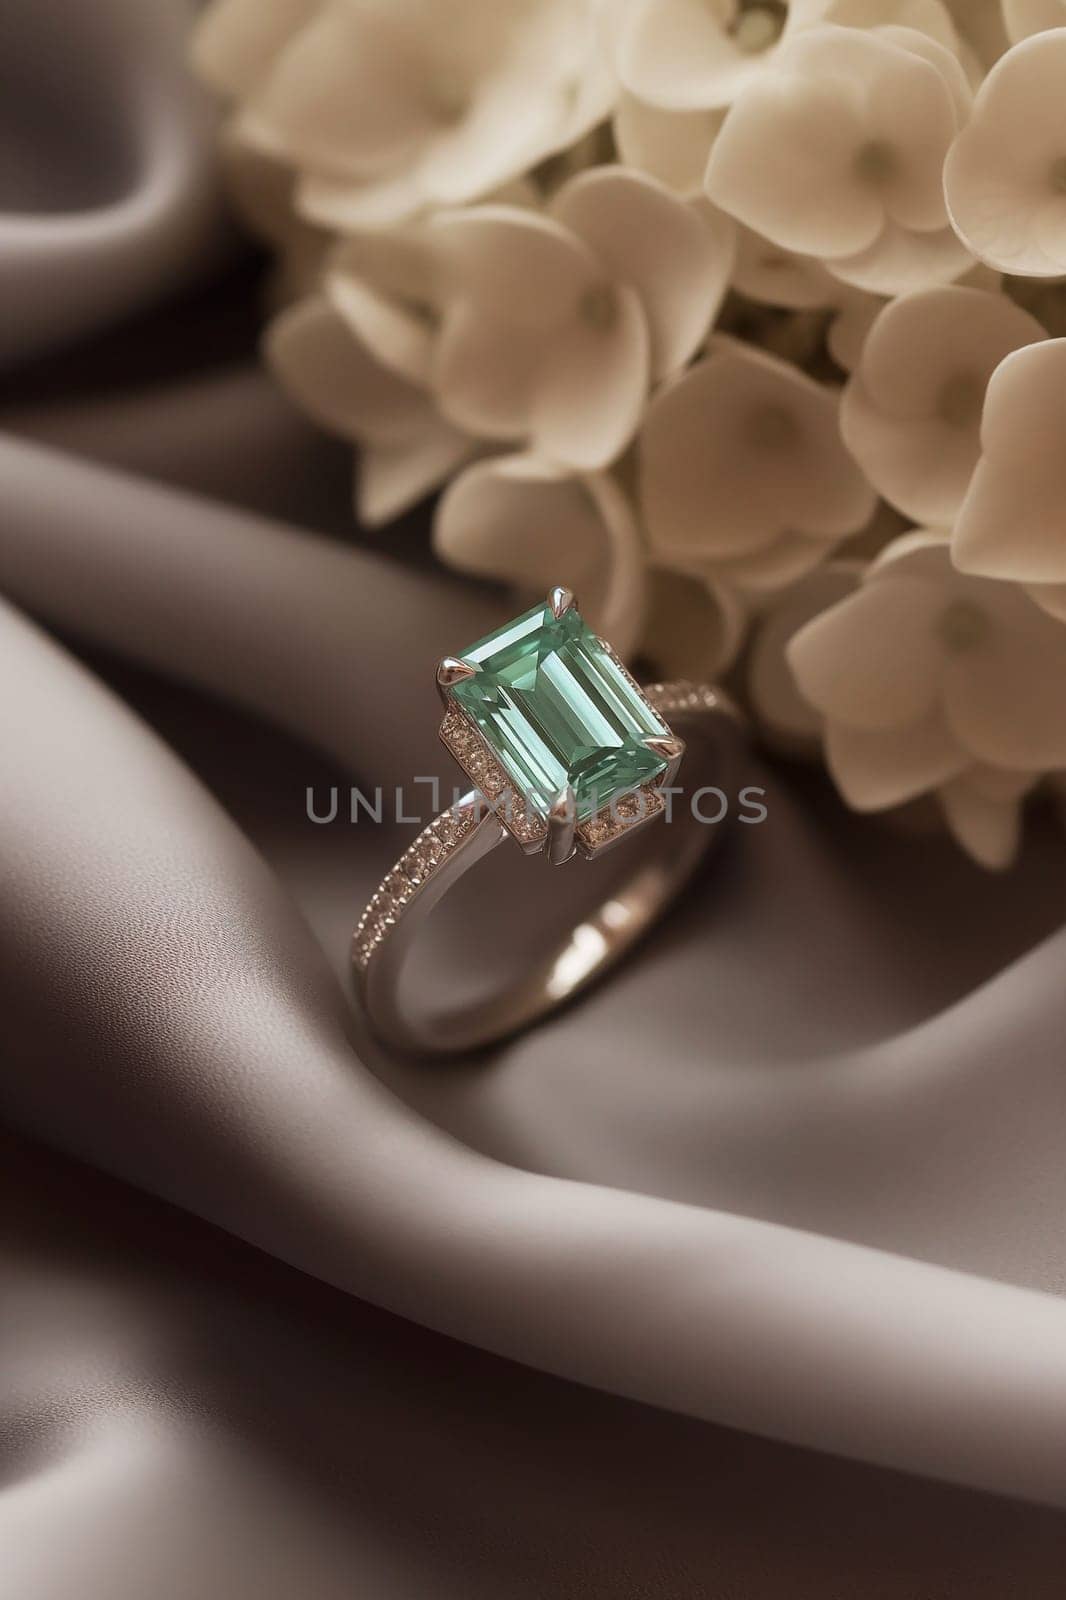 Elegant ring with emerald center stone and diamond accents surrounded by white flowers